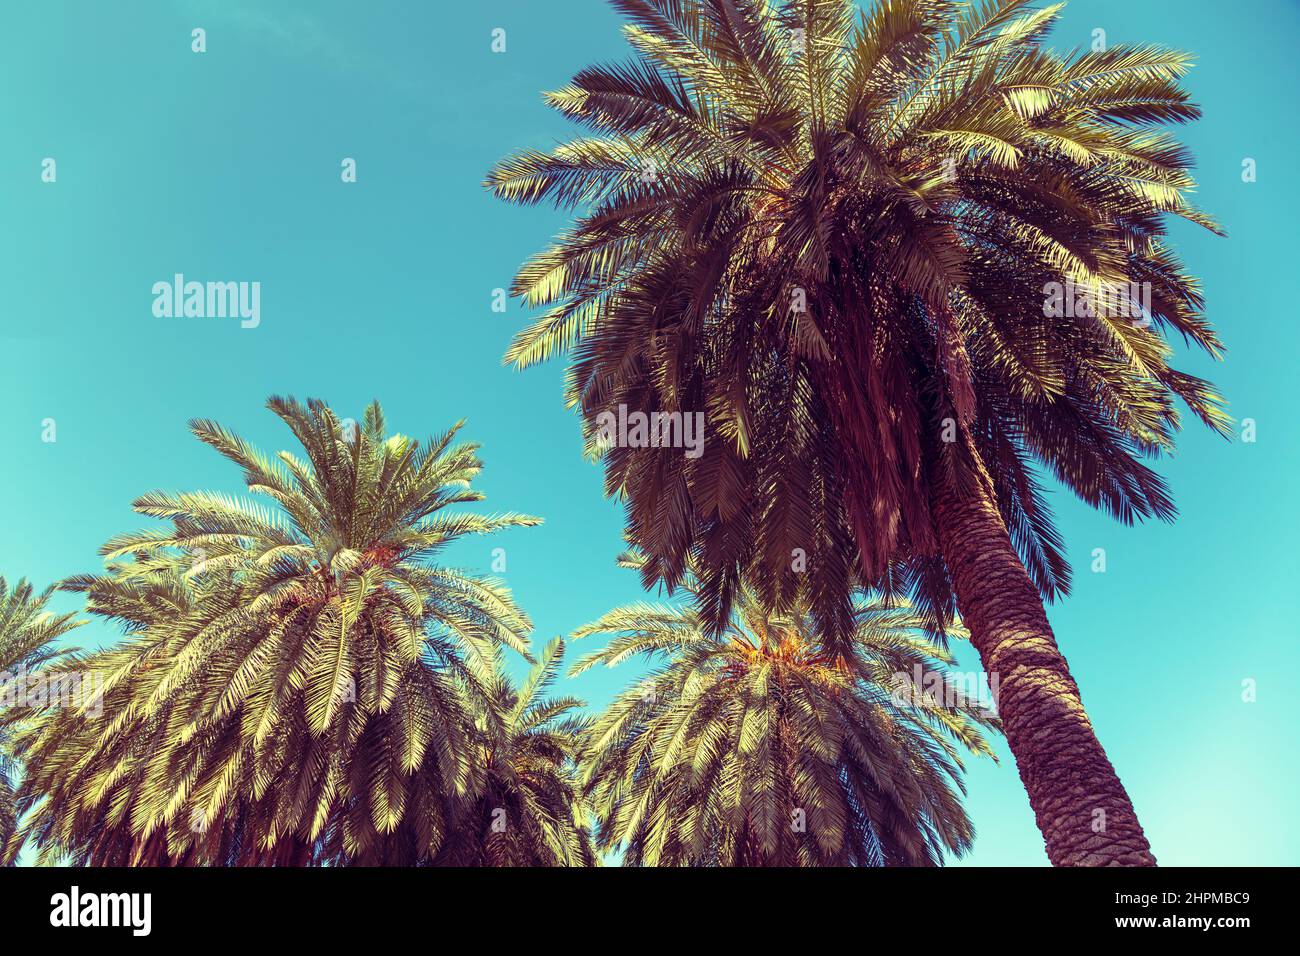 Date palms against blue sky Stock Photo